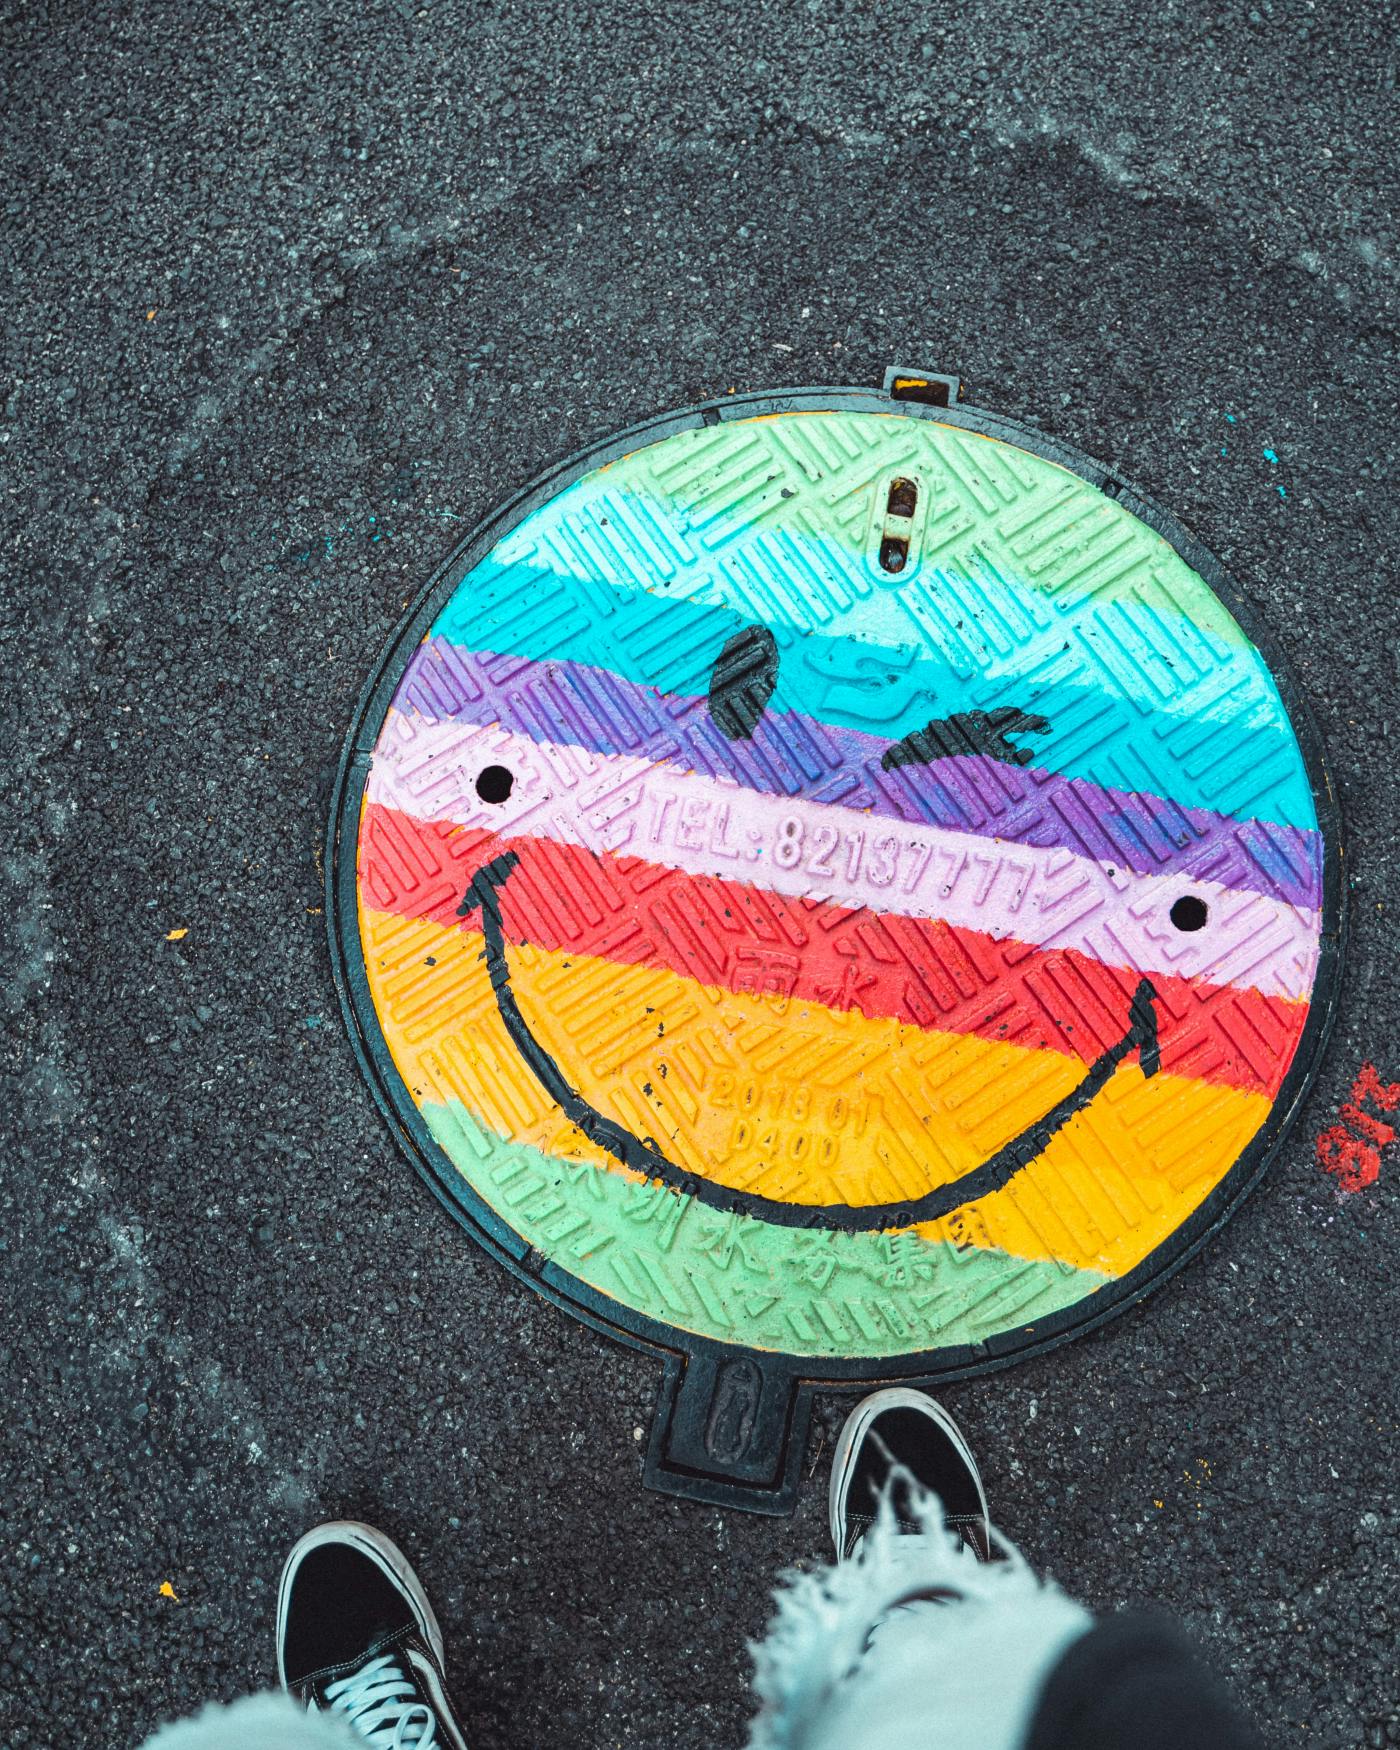 A manhole covered painted with a smiley face.